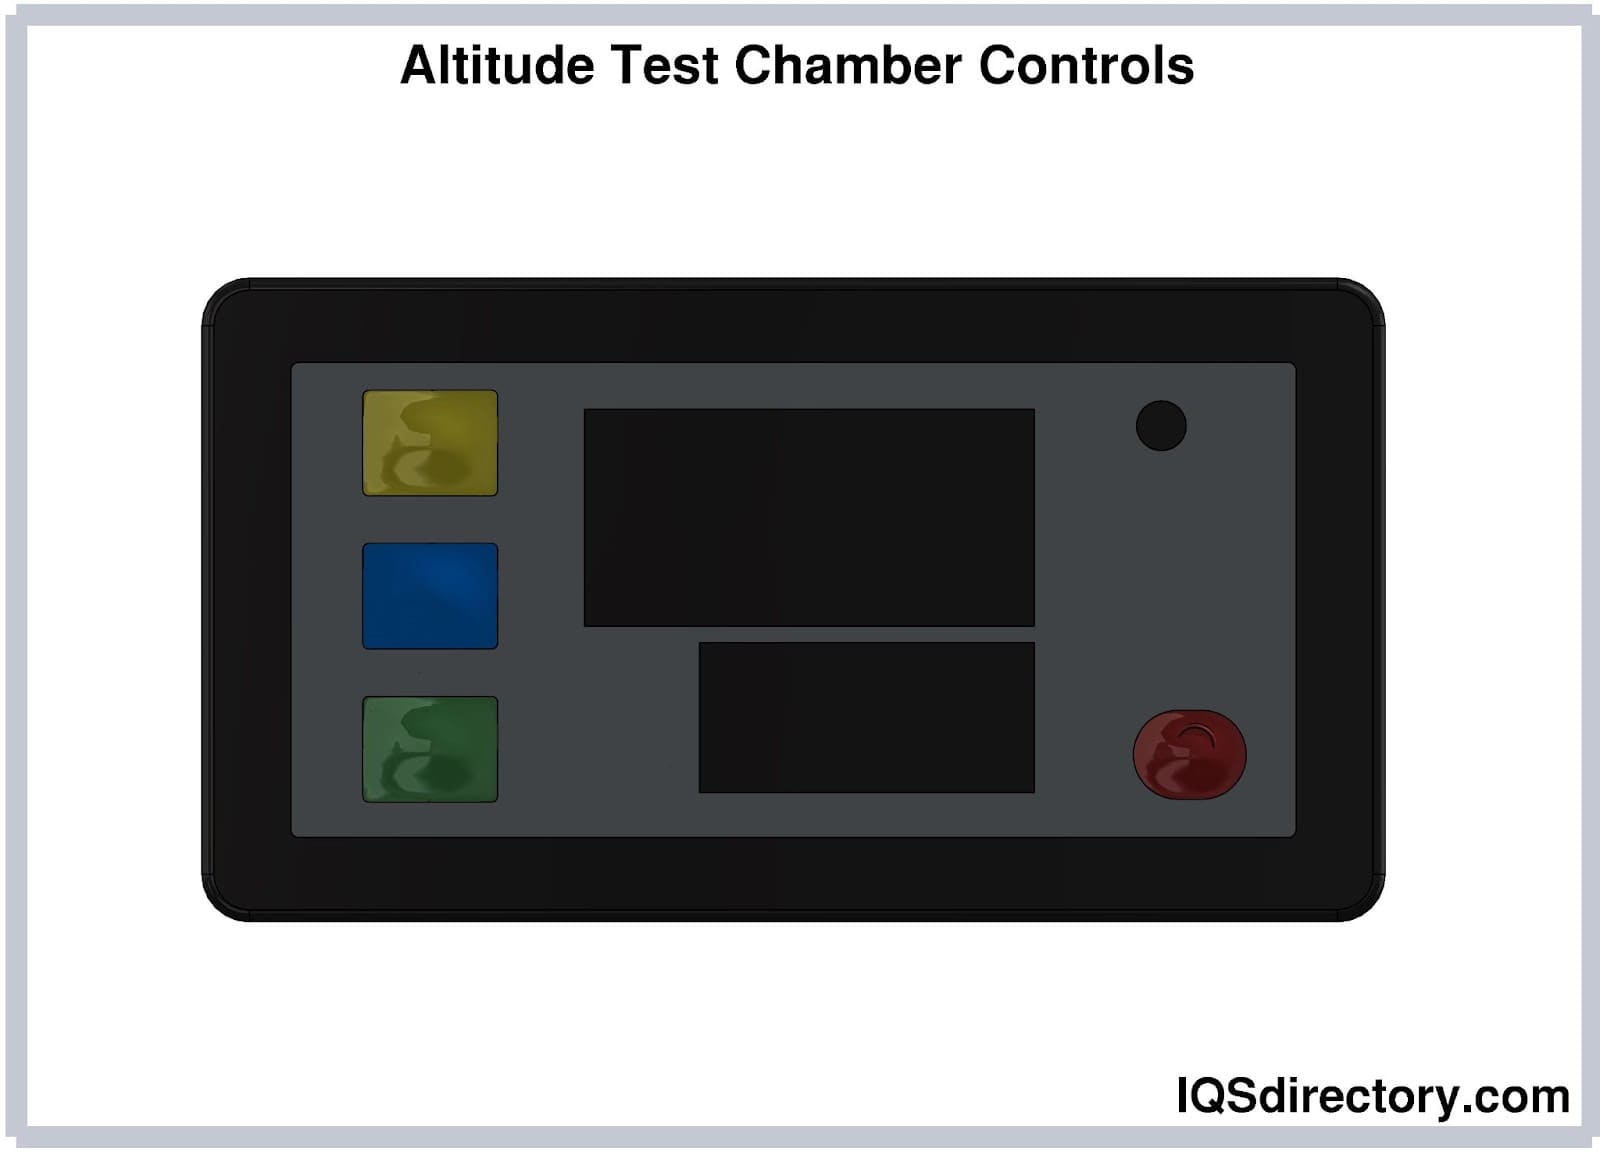 Altitude Test Chamber Controls